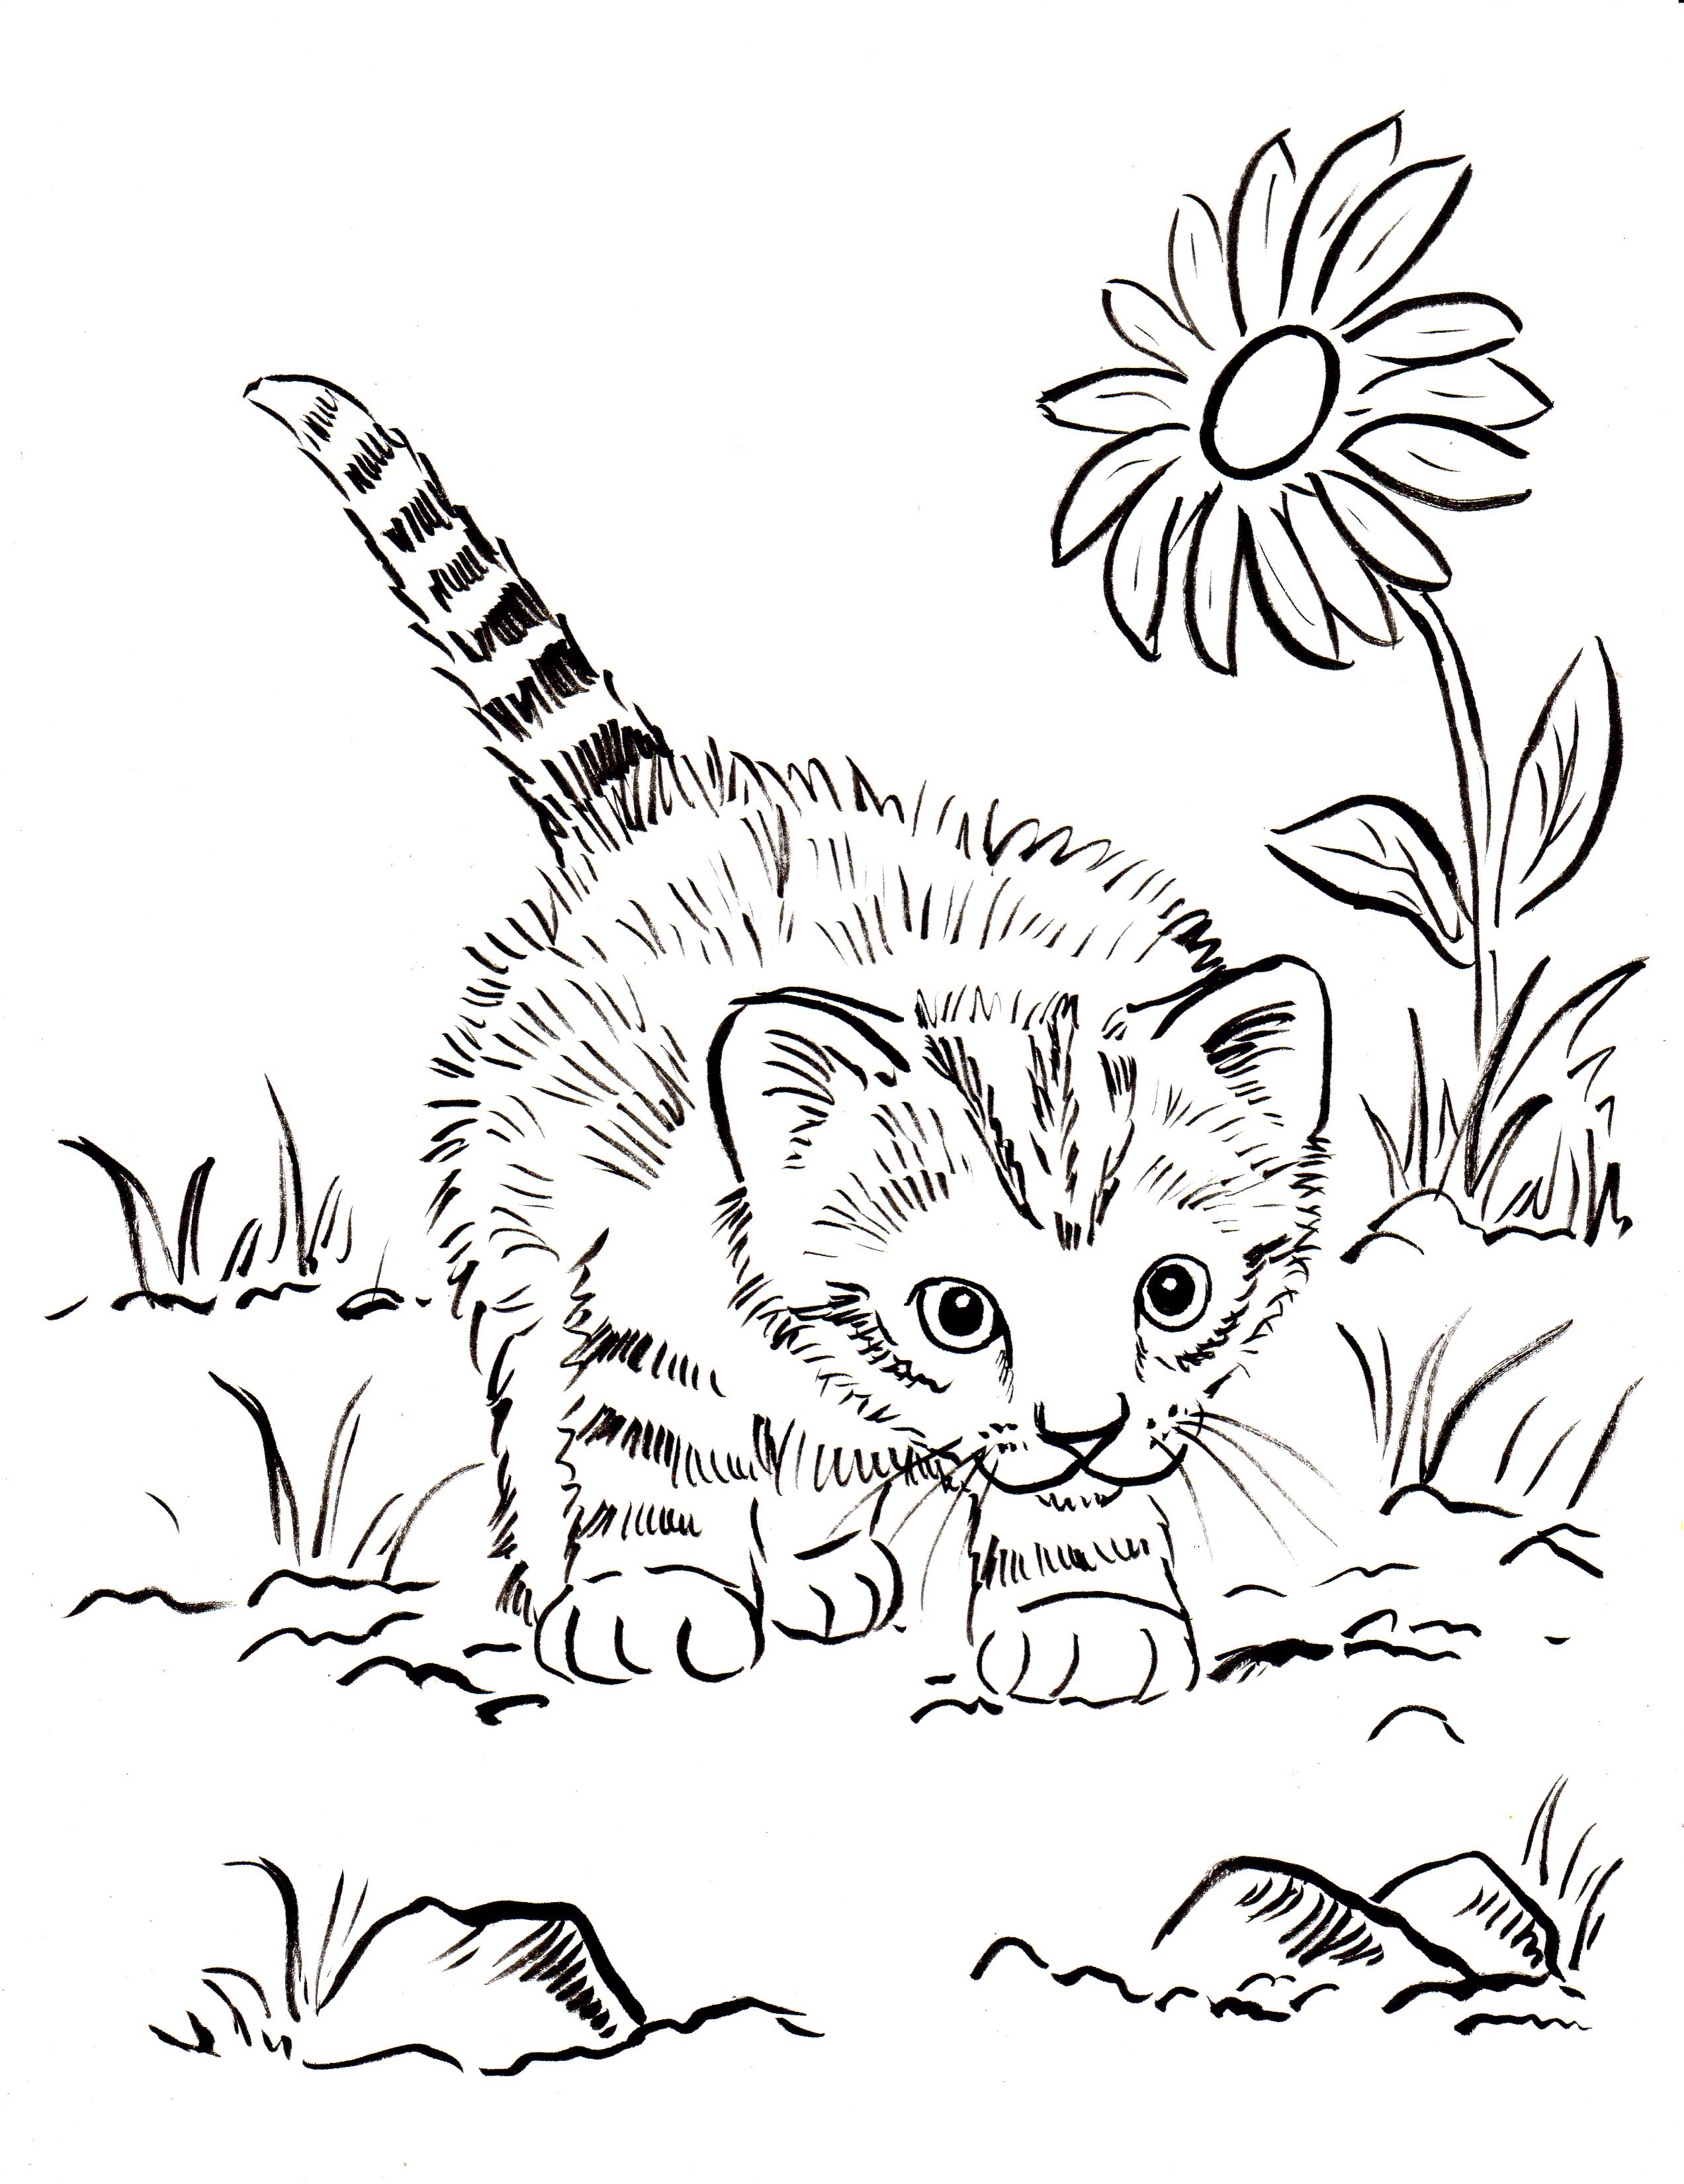 Kitten Coloring Page - Samantha Bell